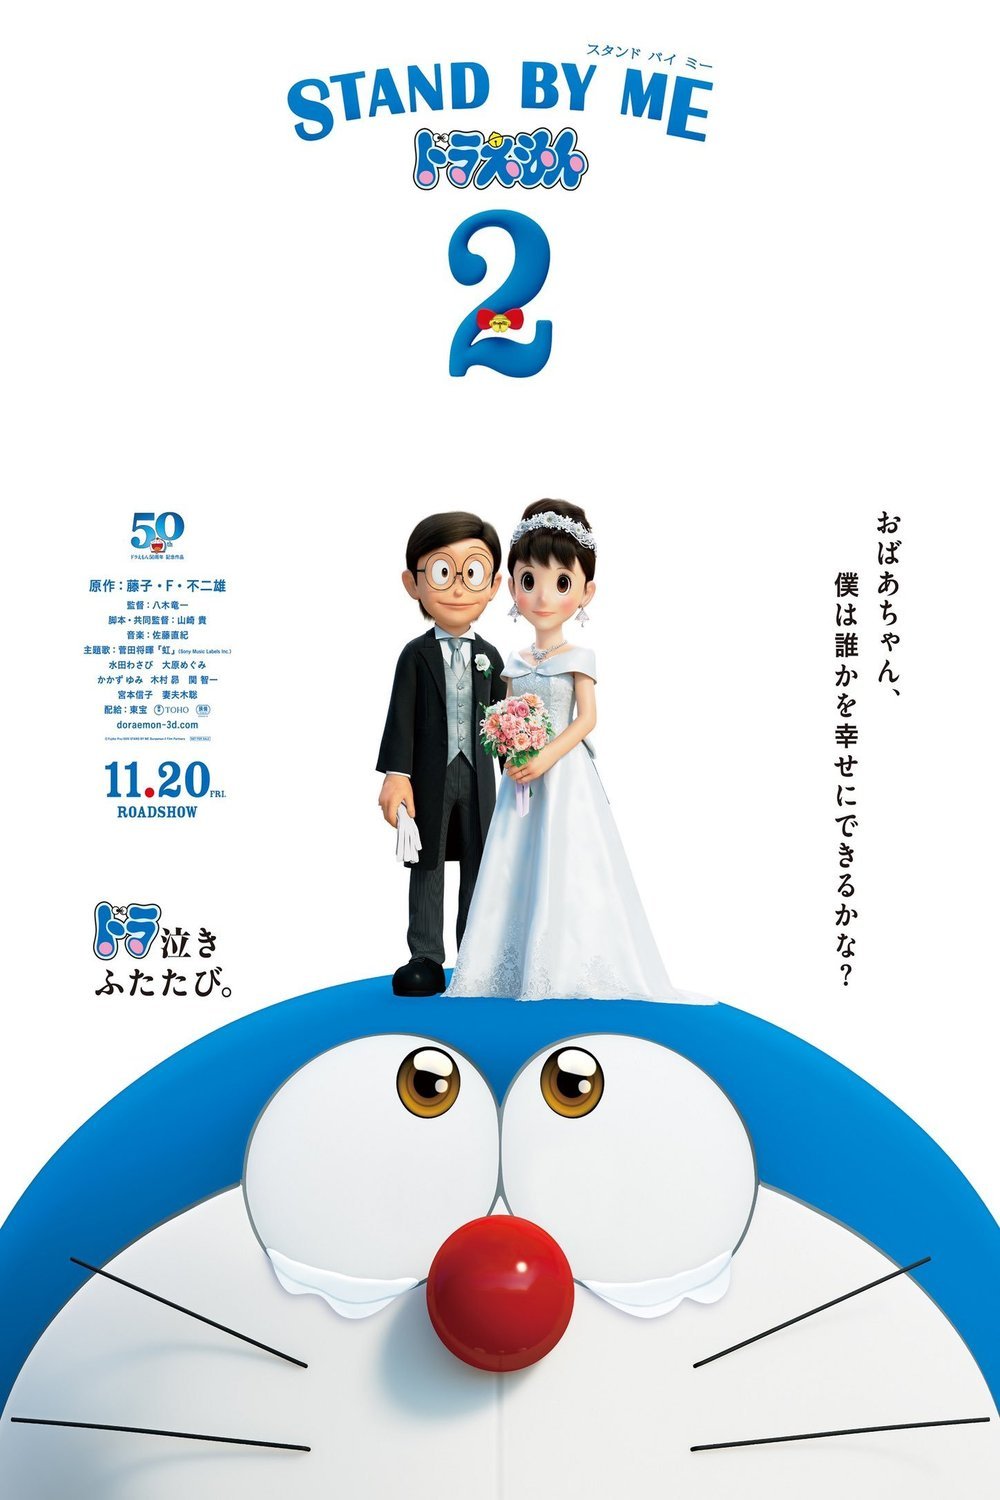 Japanese poster of the movie Stand by Me Doraemon 2